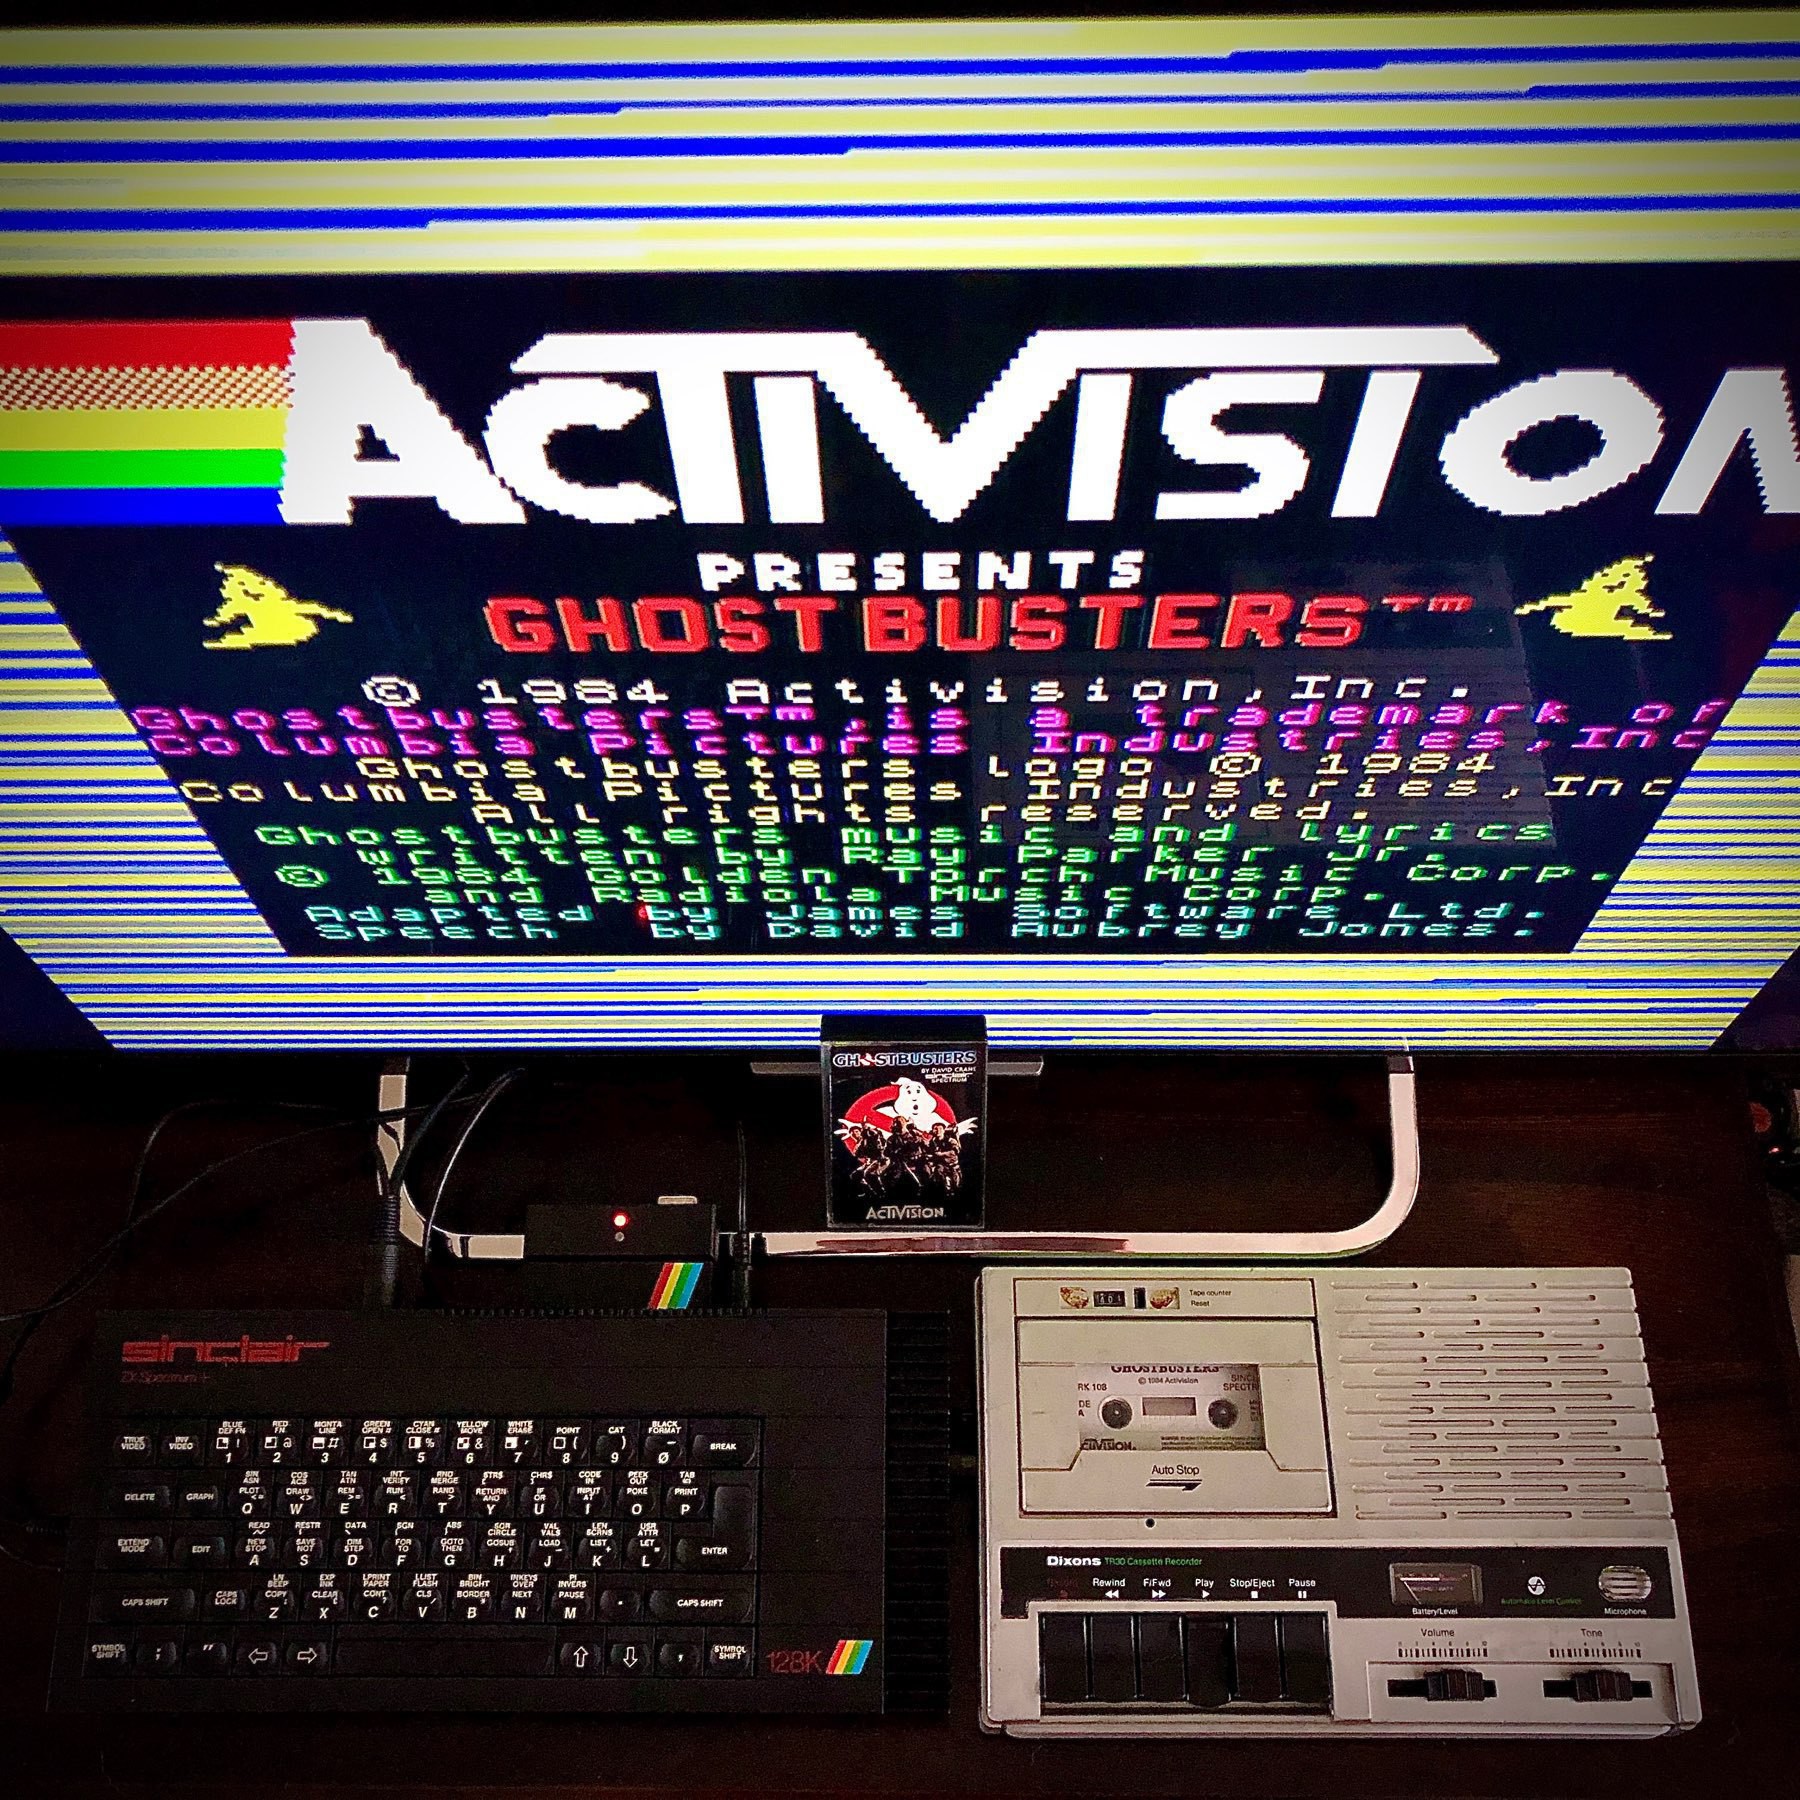 ZX Spectrum, Dixons cassette recorder, Ghostbusters 1984 video game